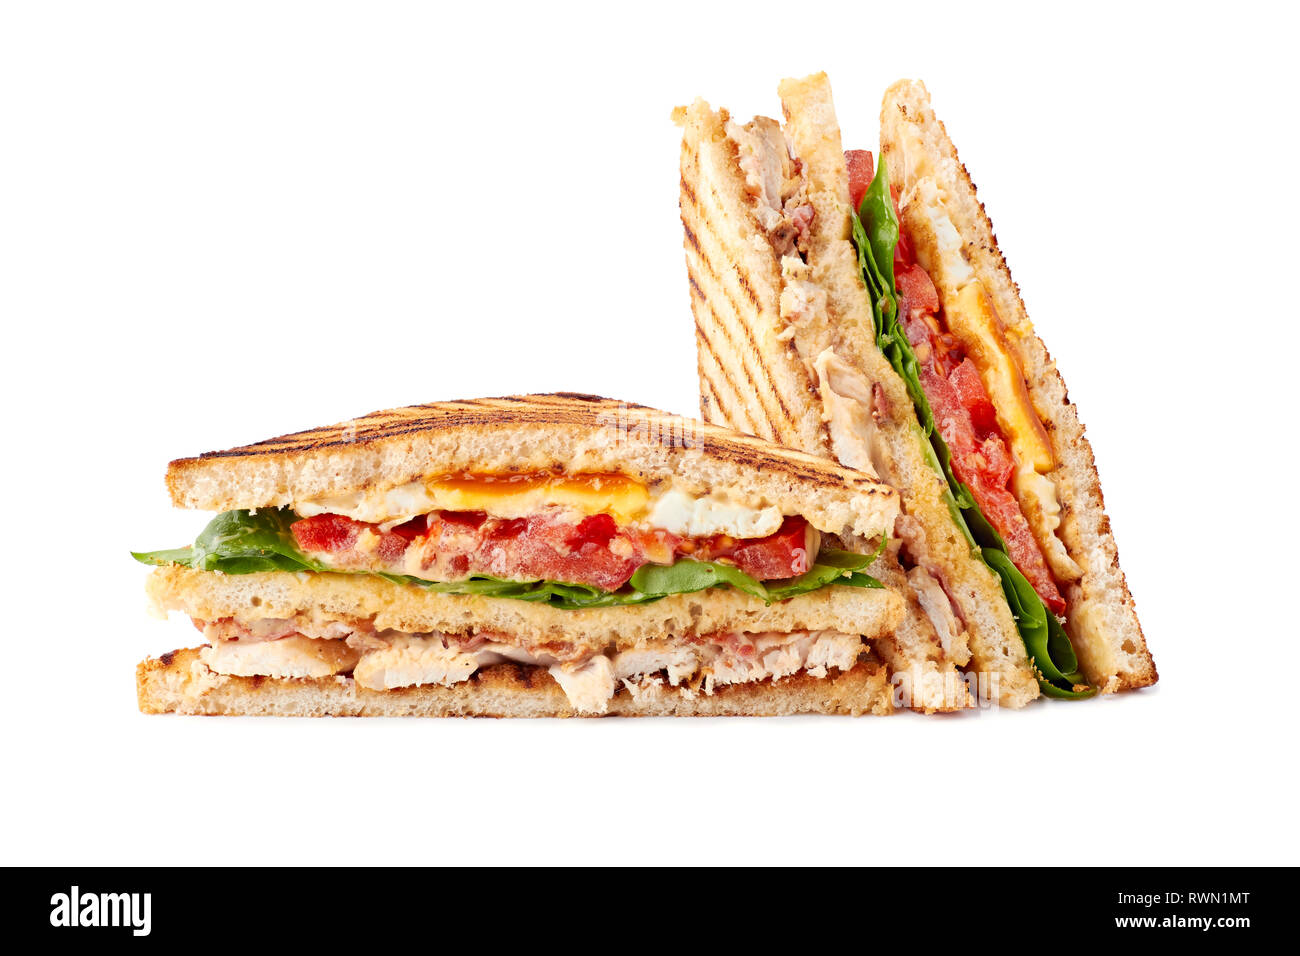 Delicious sliced club sandwich on white background Stock Photo